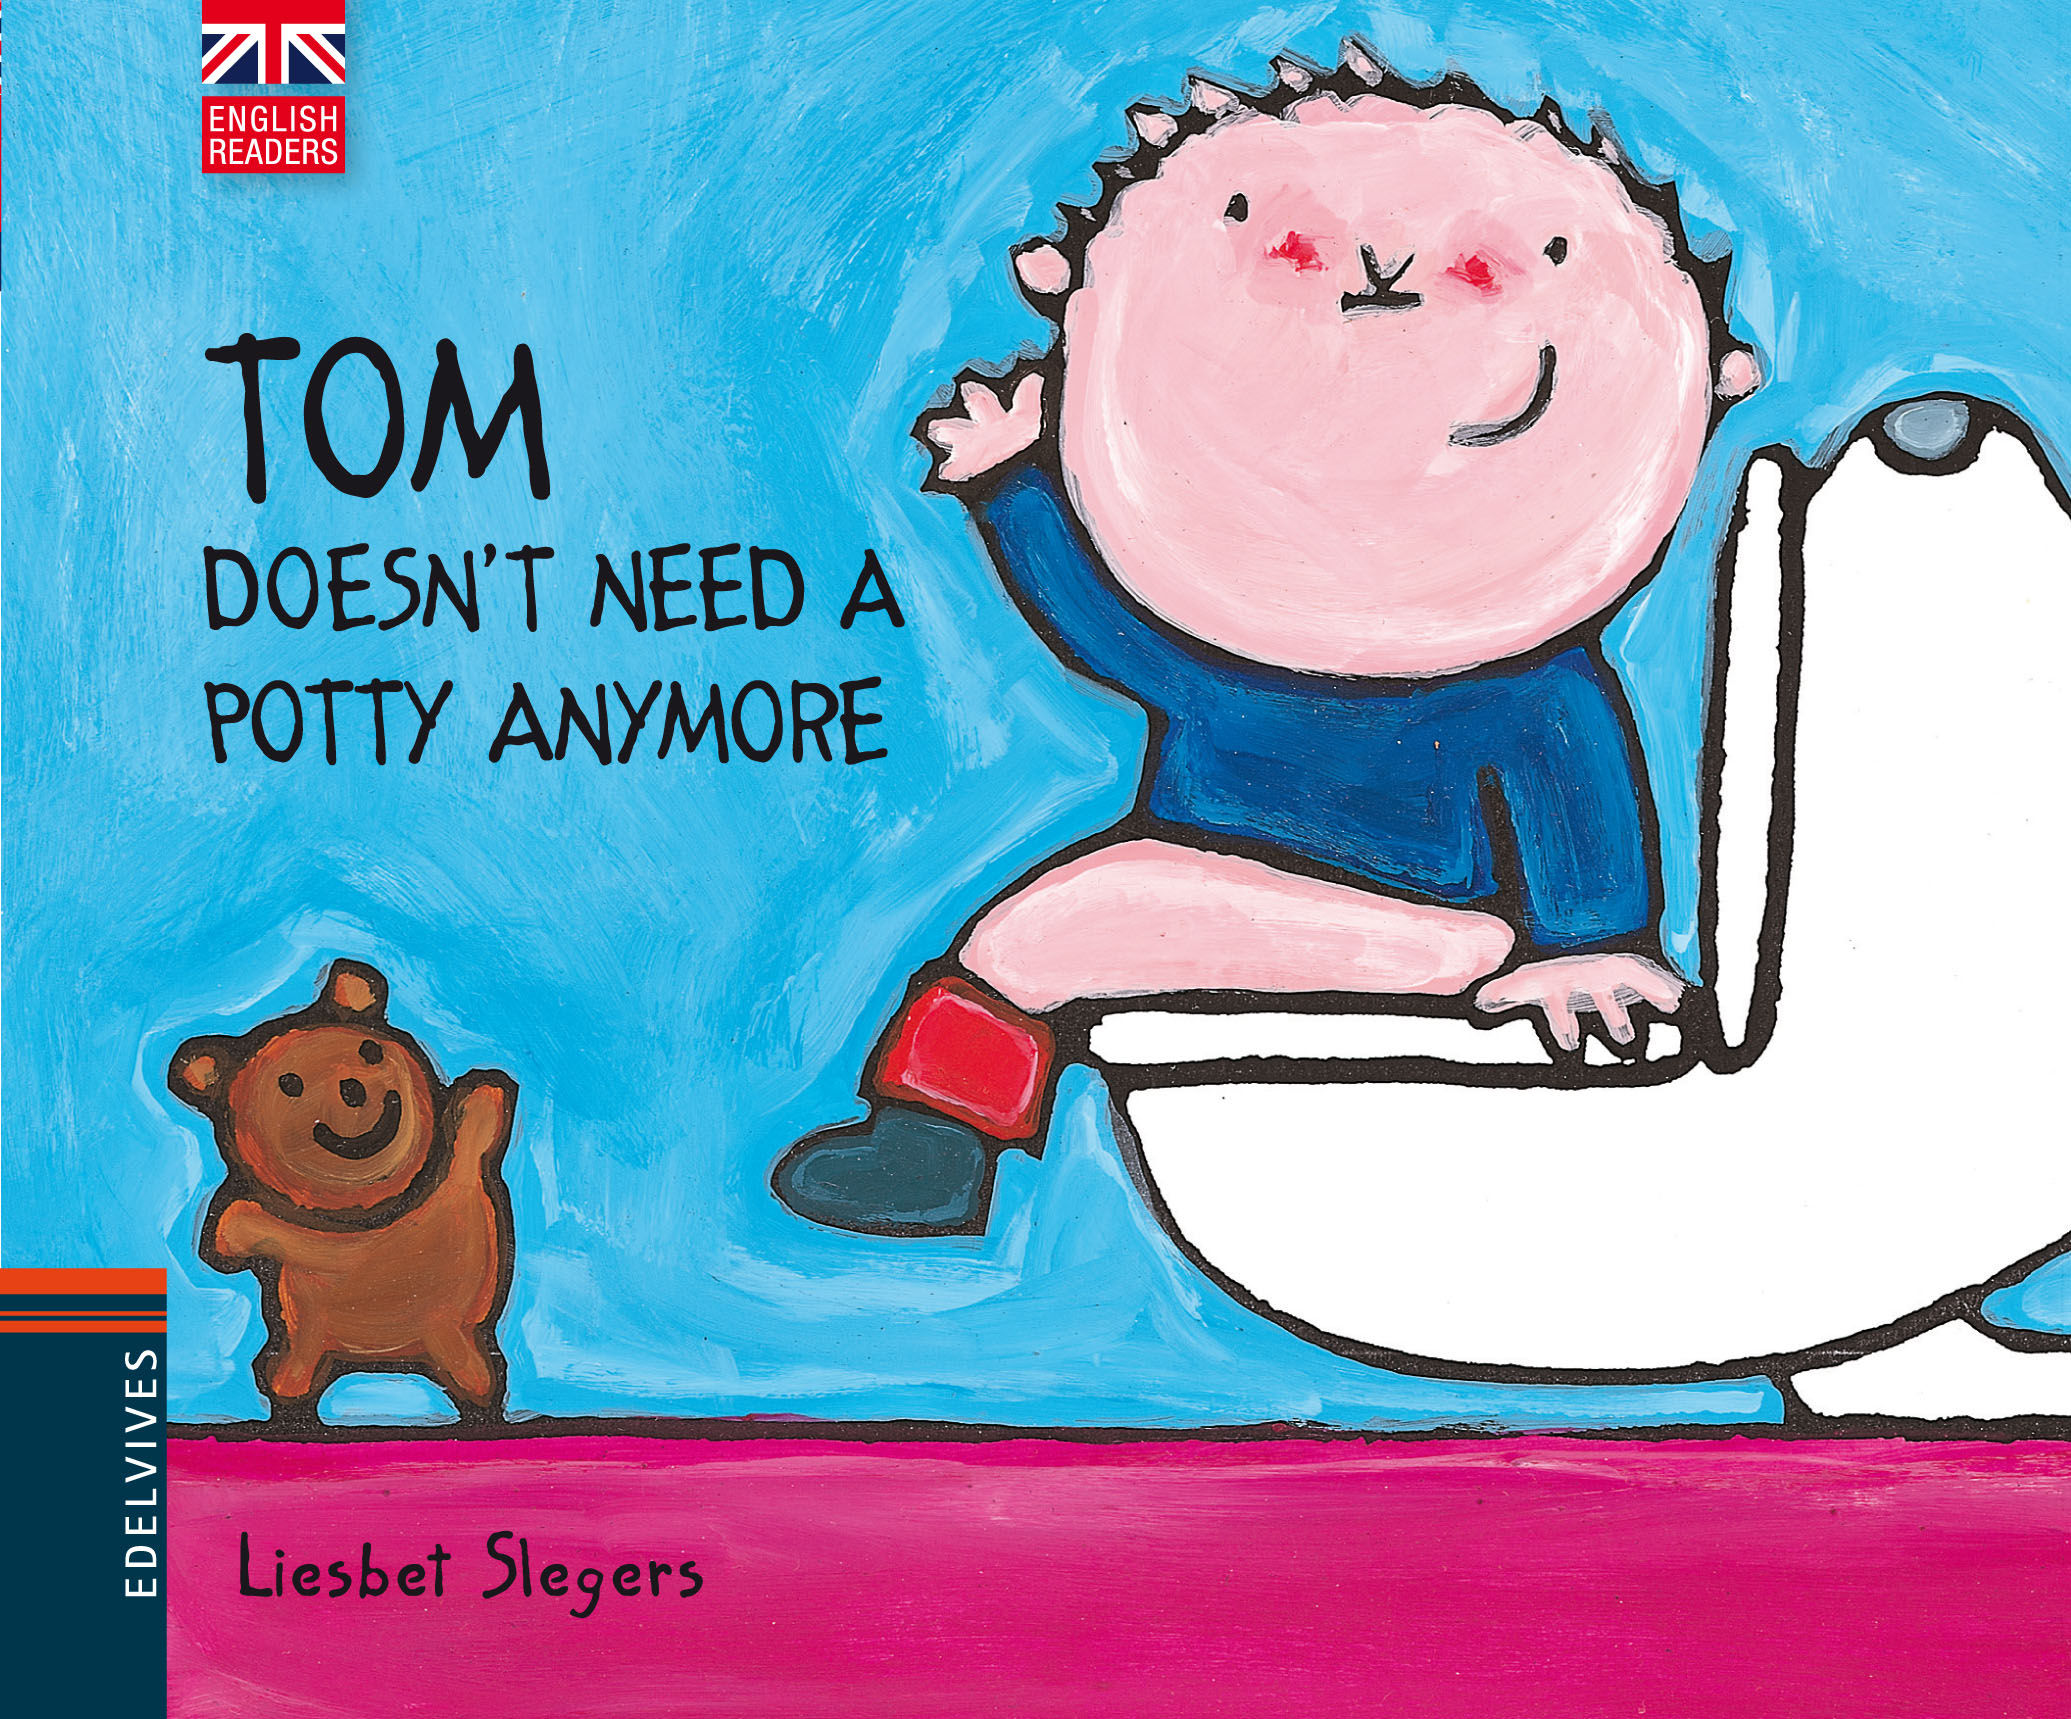 TOM DOESN'T NEED A POTTY ANYMORE. 